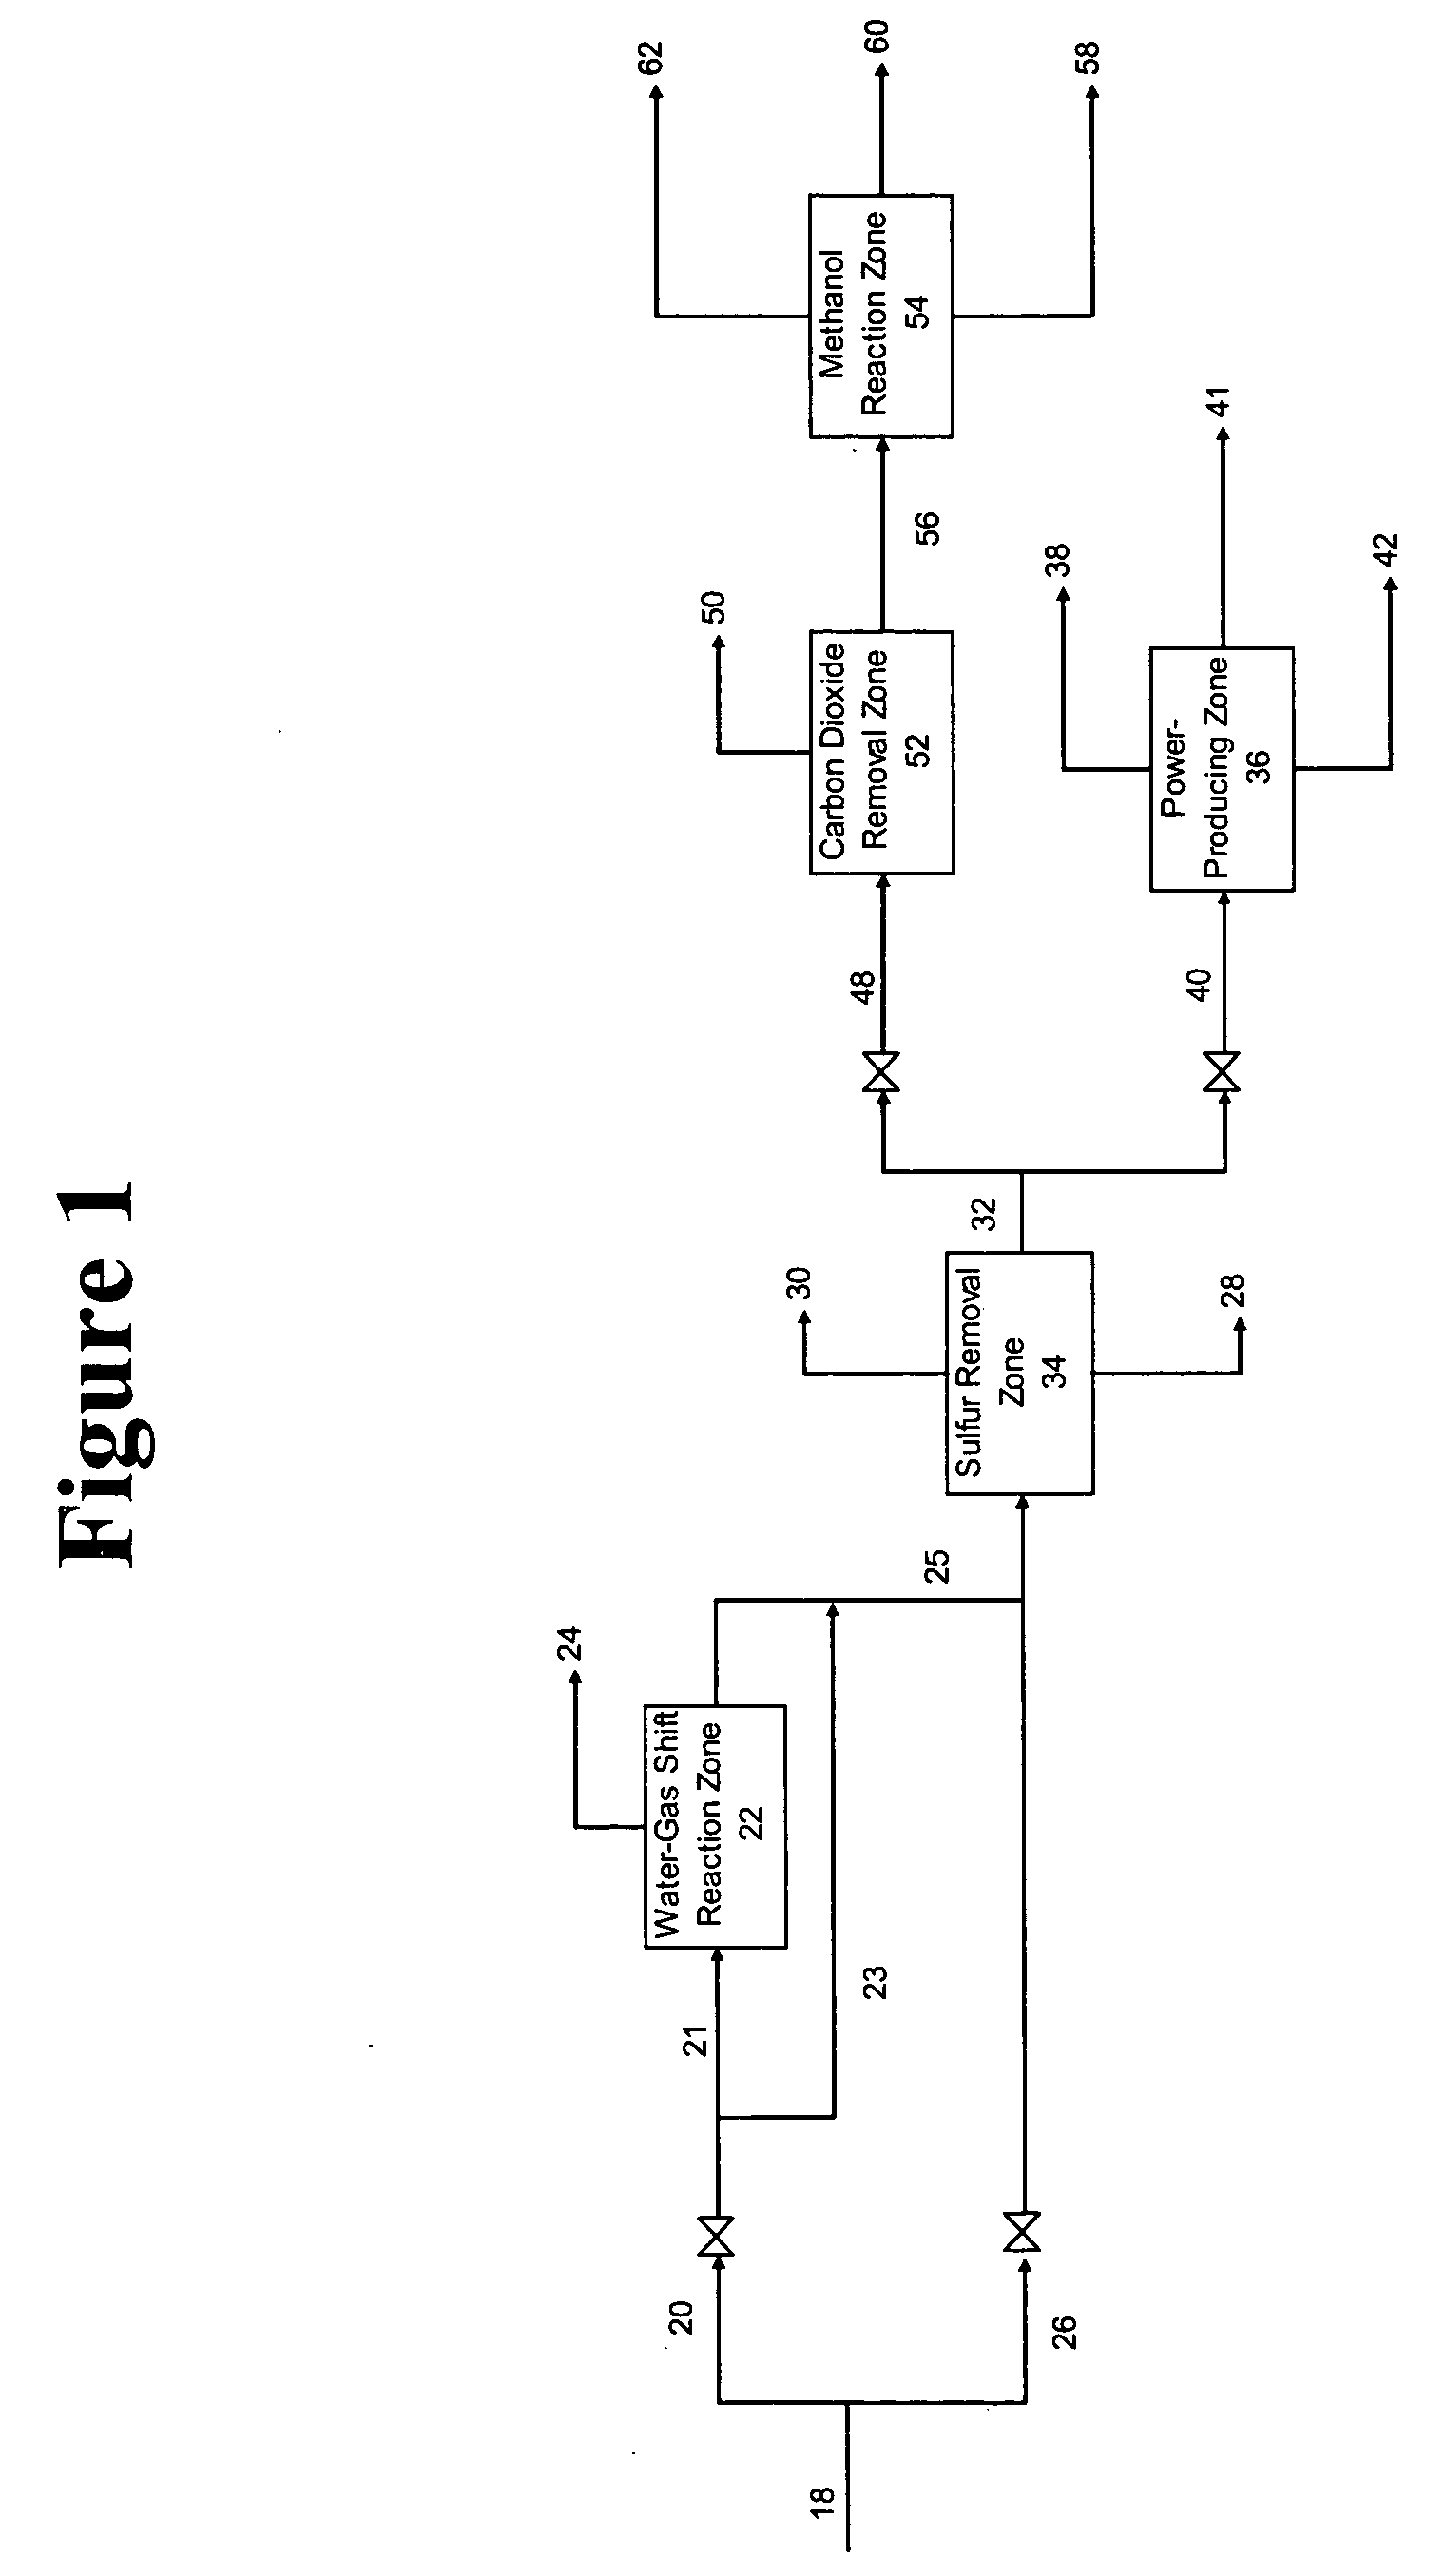 Method for satisfying variable power demand